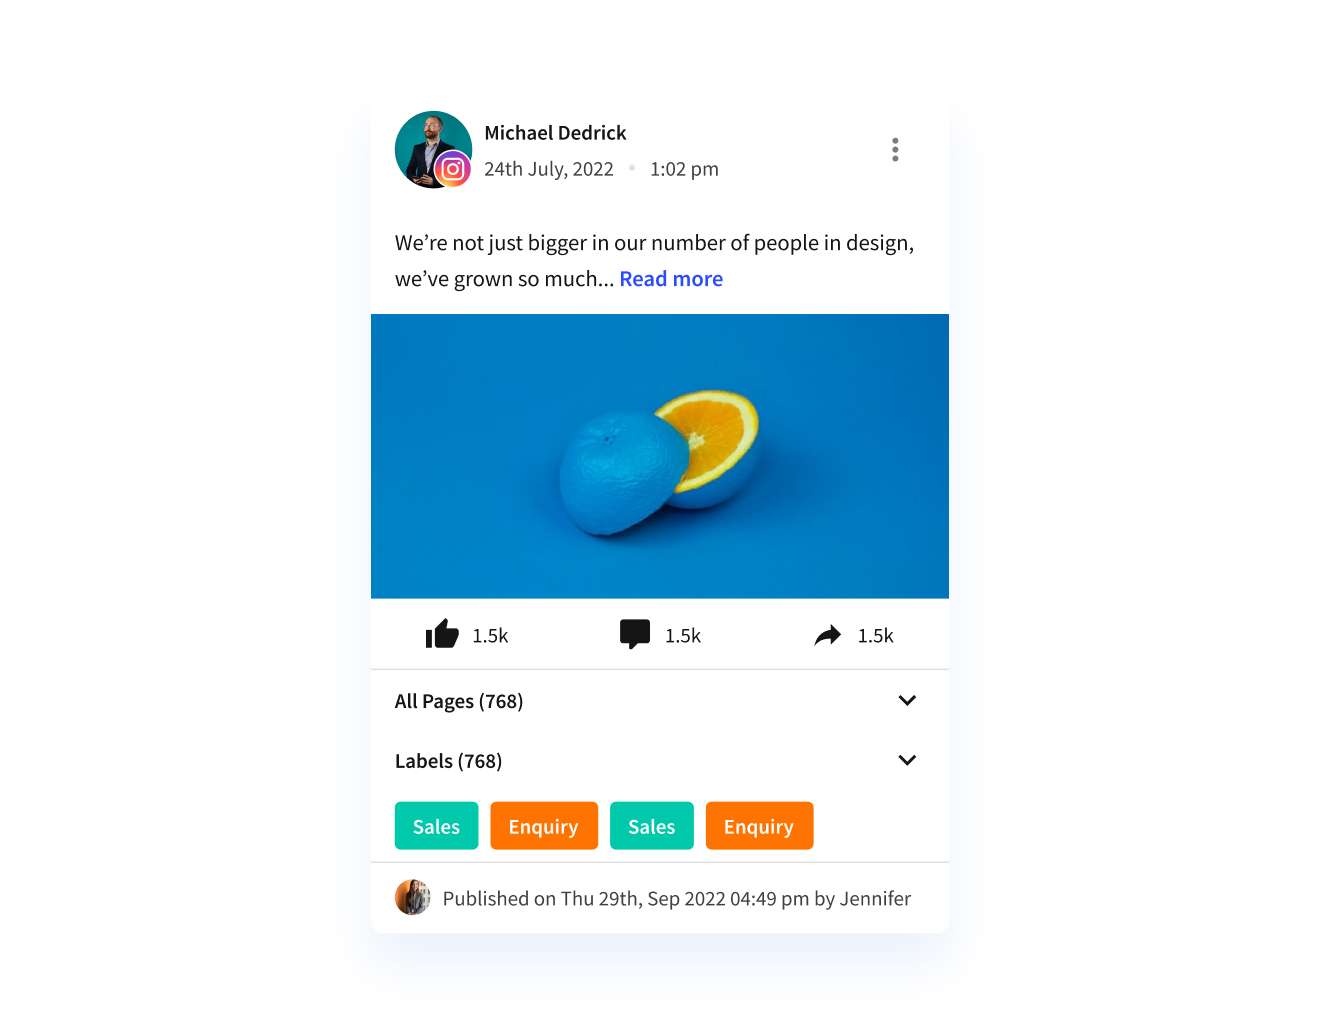 Social media post by Michael Dedrick featuring a lemon image, with engagement statistics and content labels for organizational tracking.